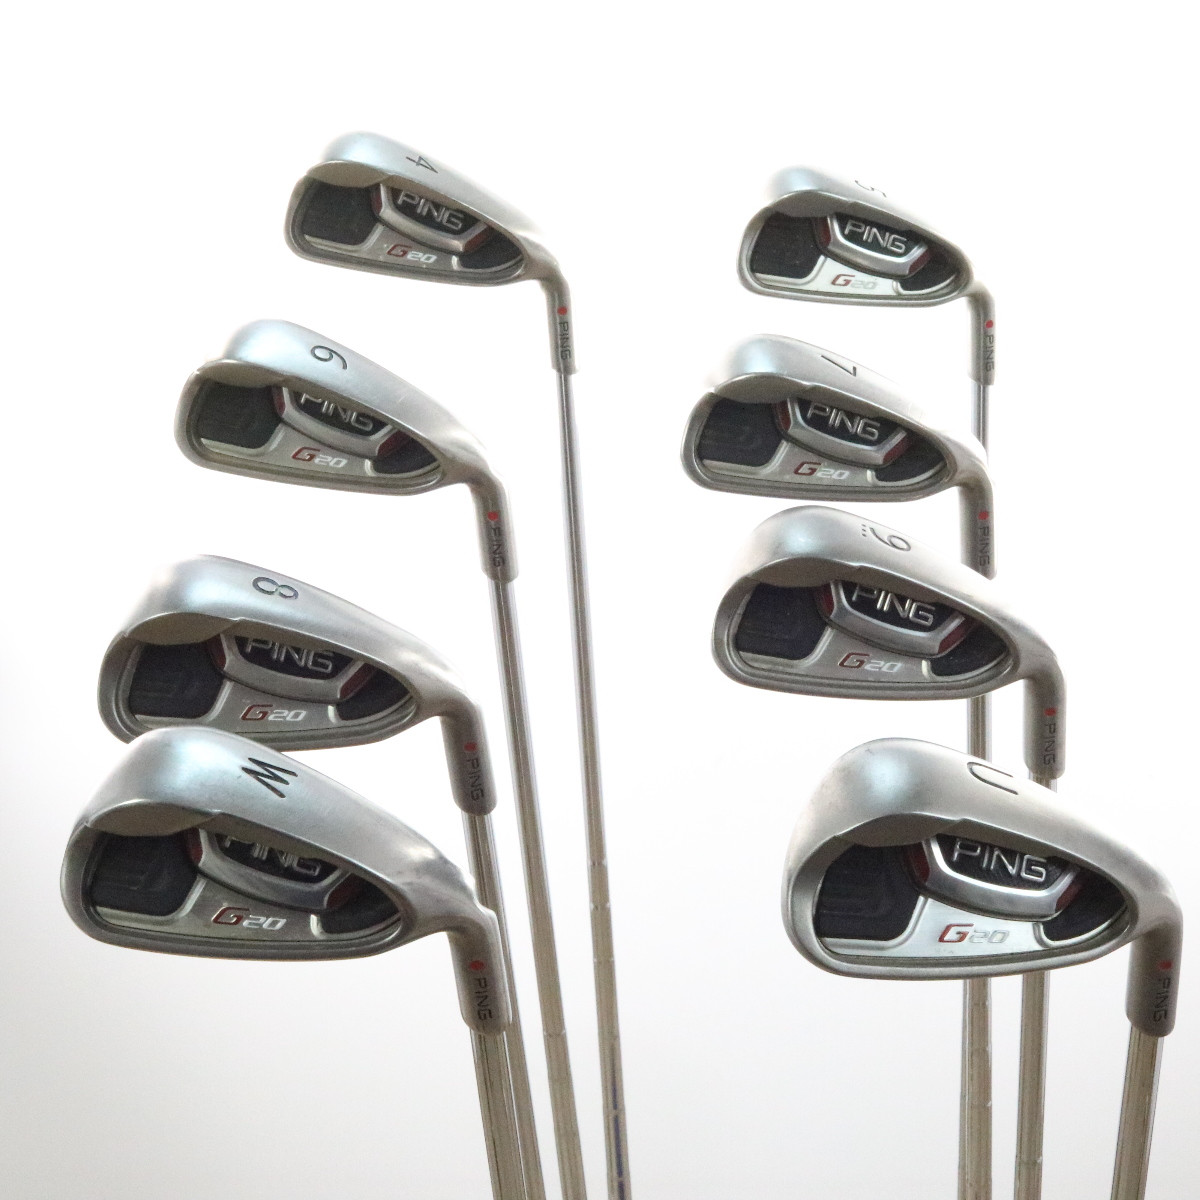 ping g20 shaft specifications